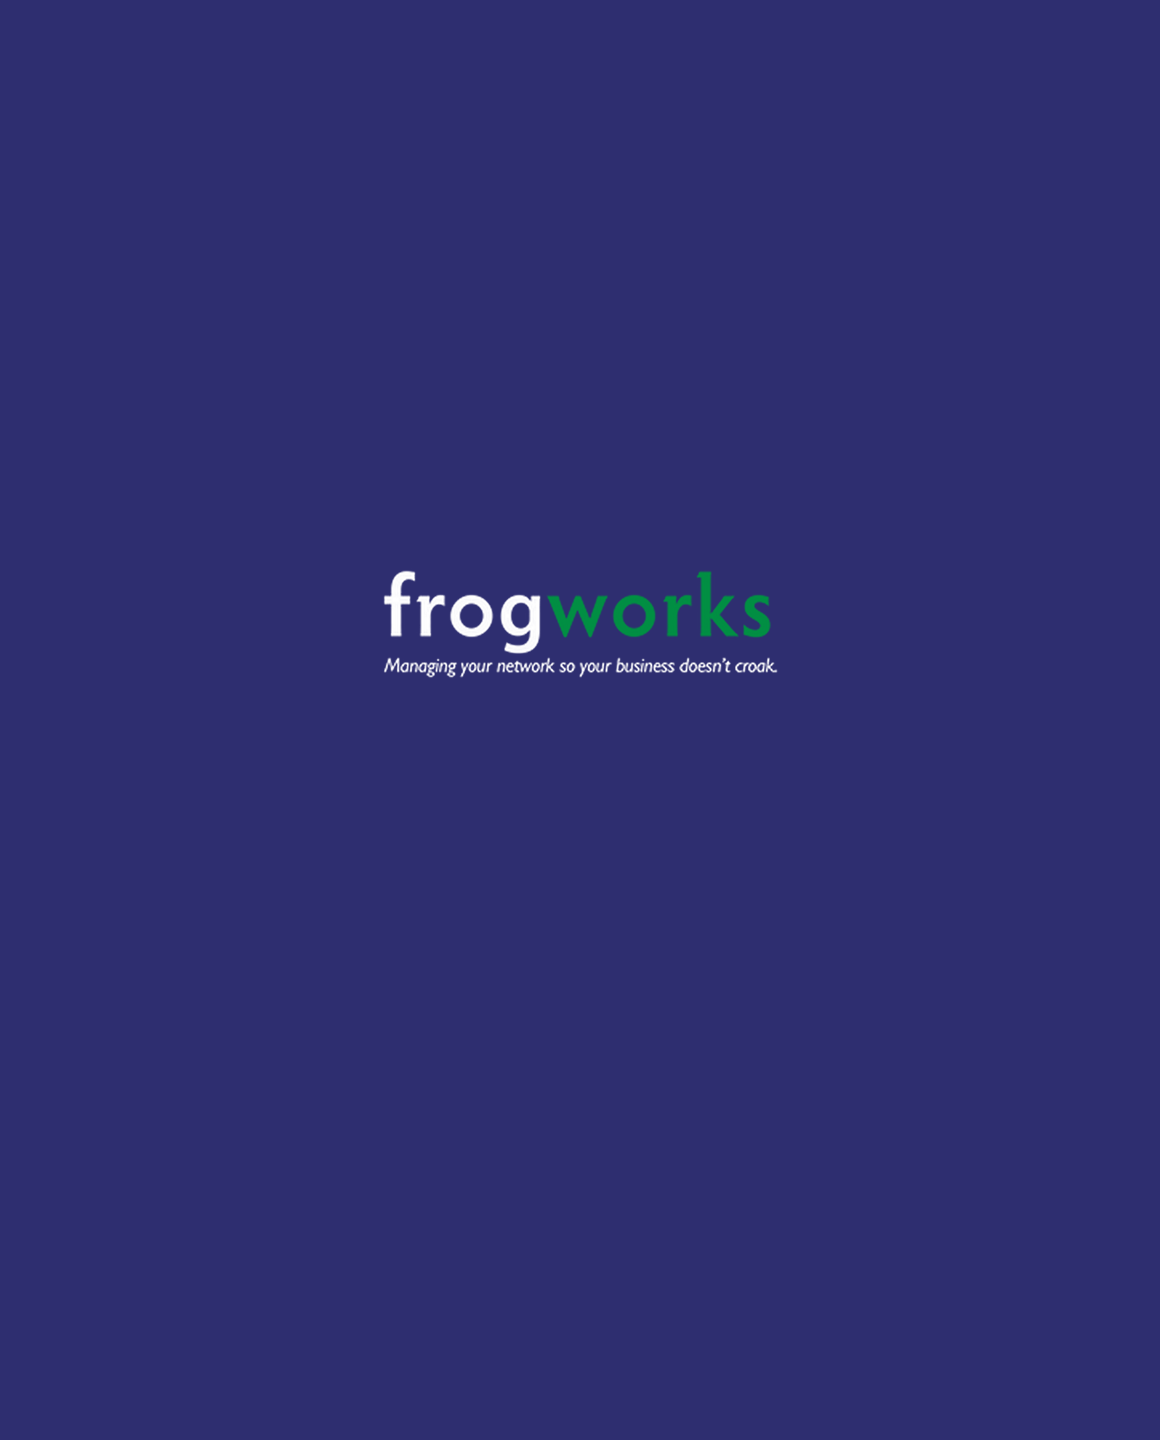 How Frogworks Can Help Your Business in The Greater Washing DC Area